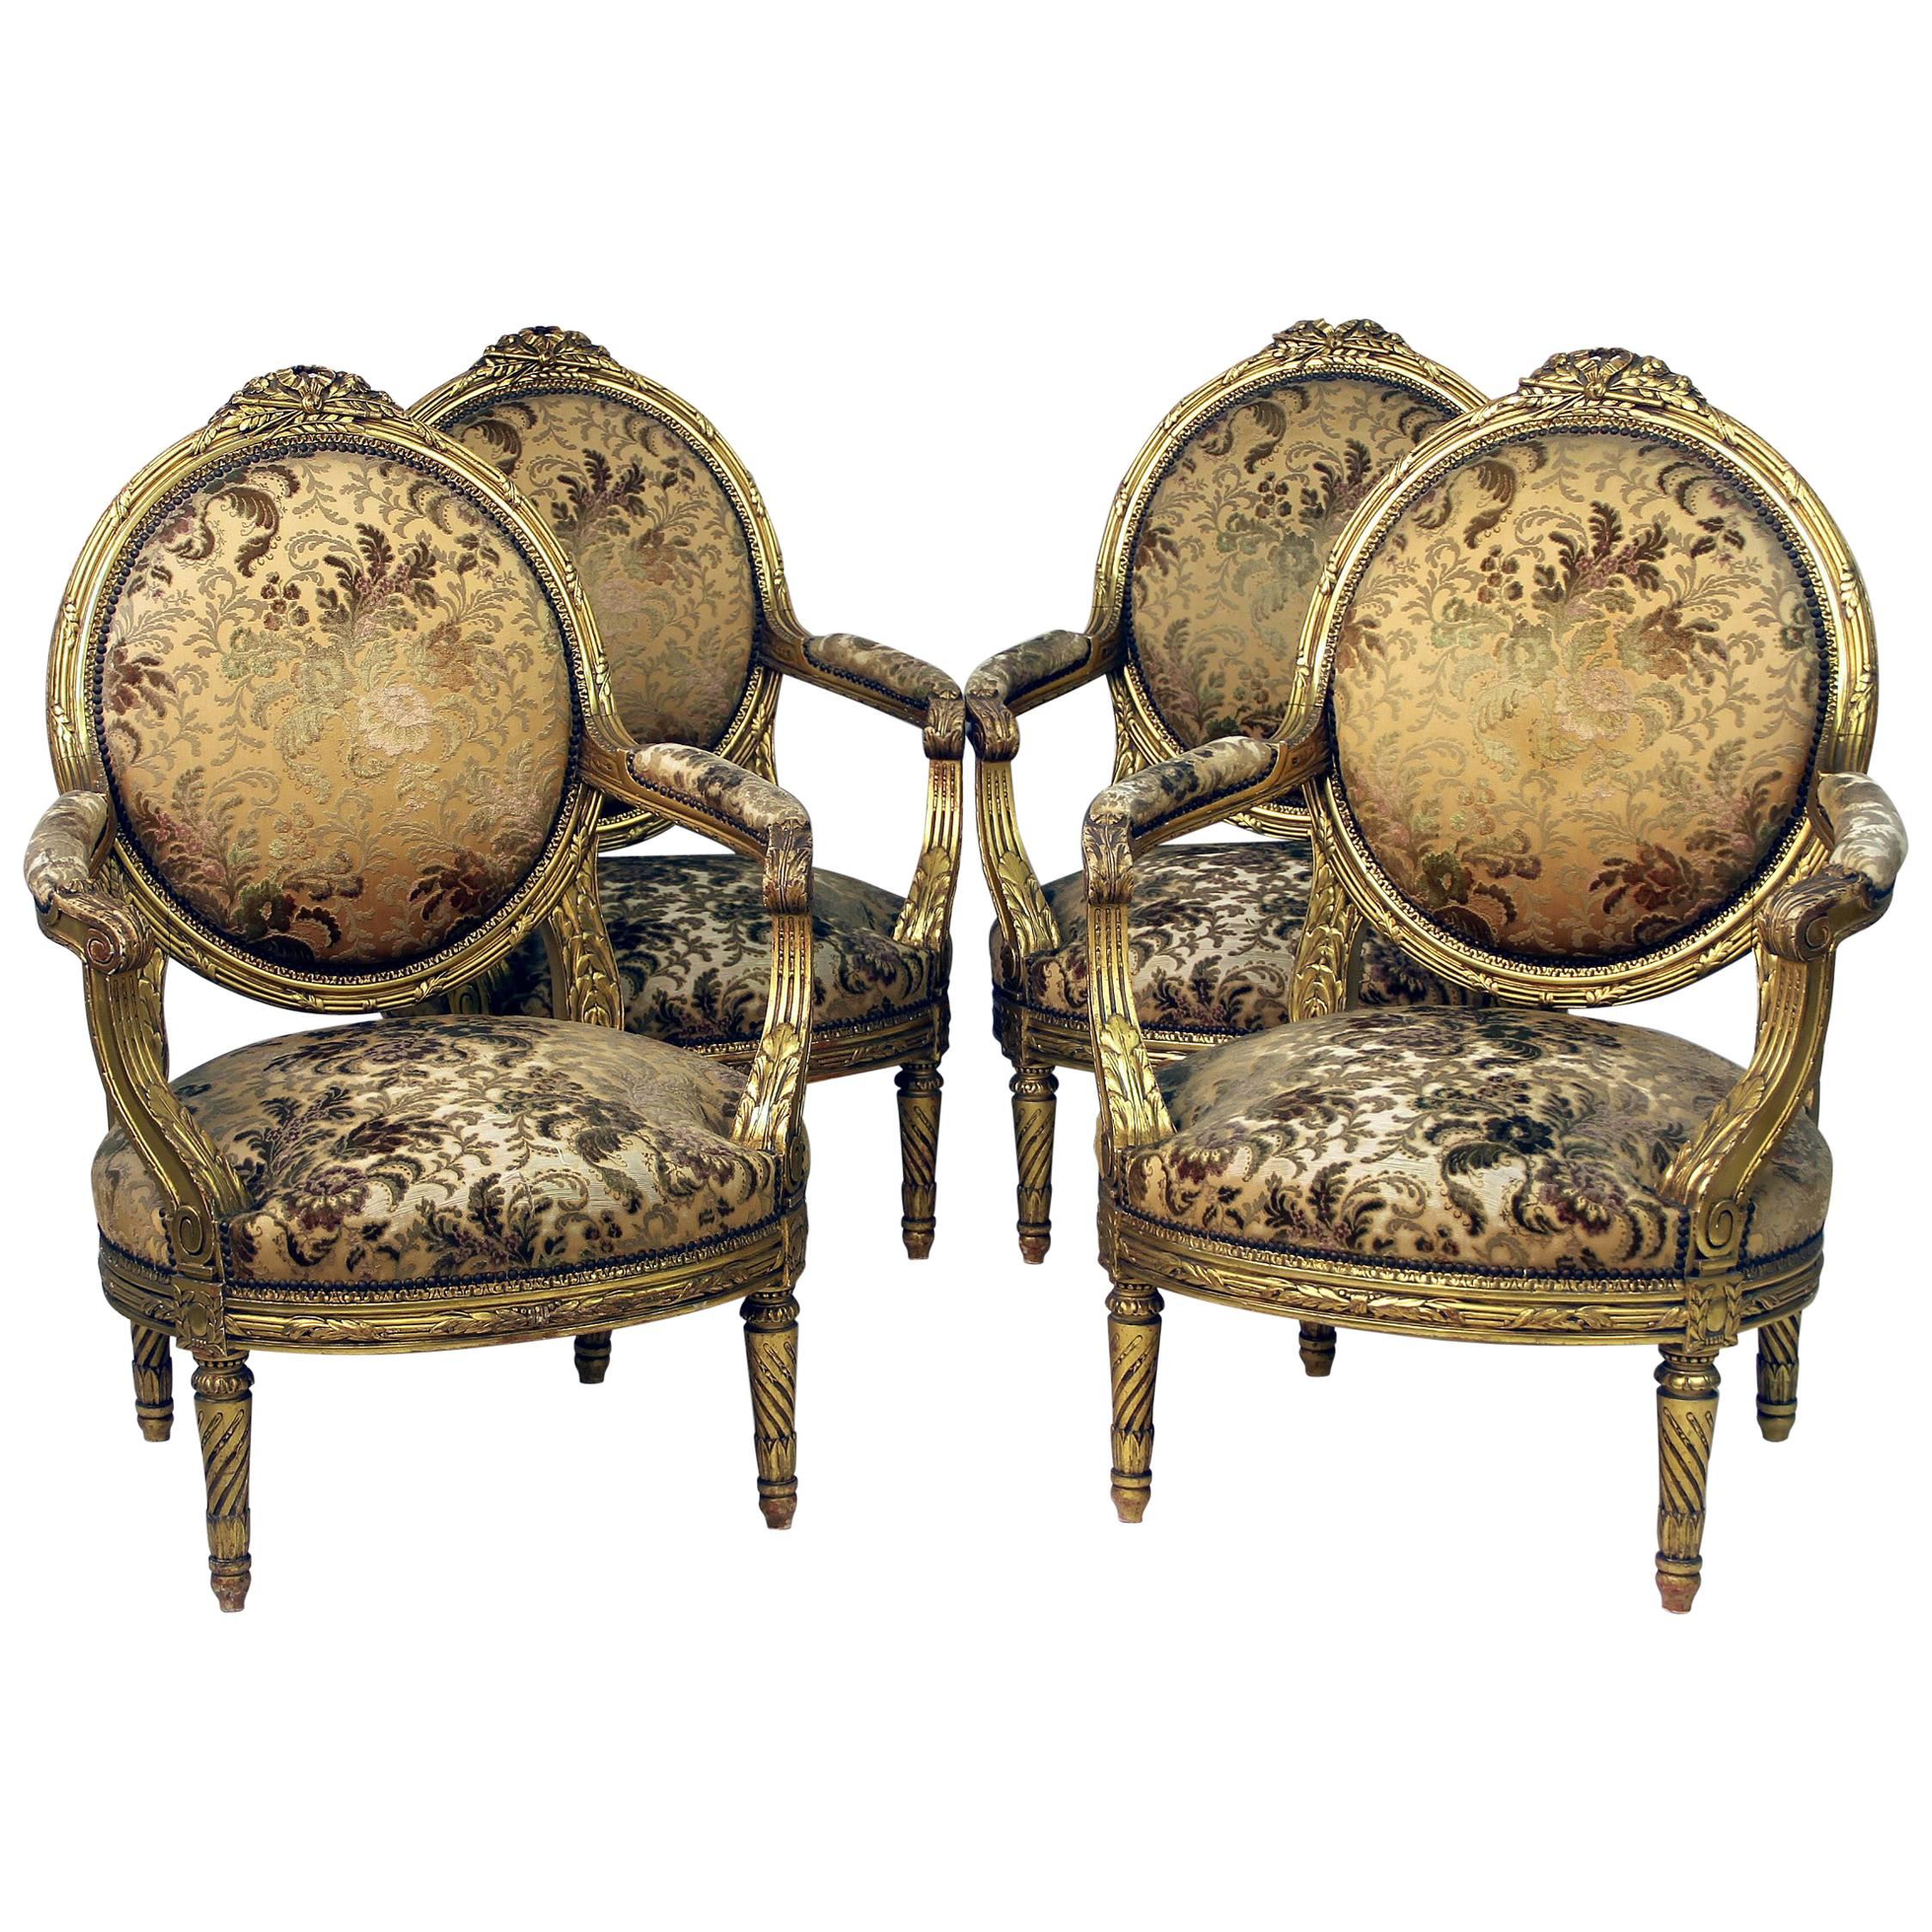 Important Set of Four Late 19th Century Louis XVI Style Giltwood Armchairs